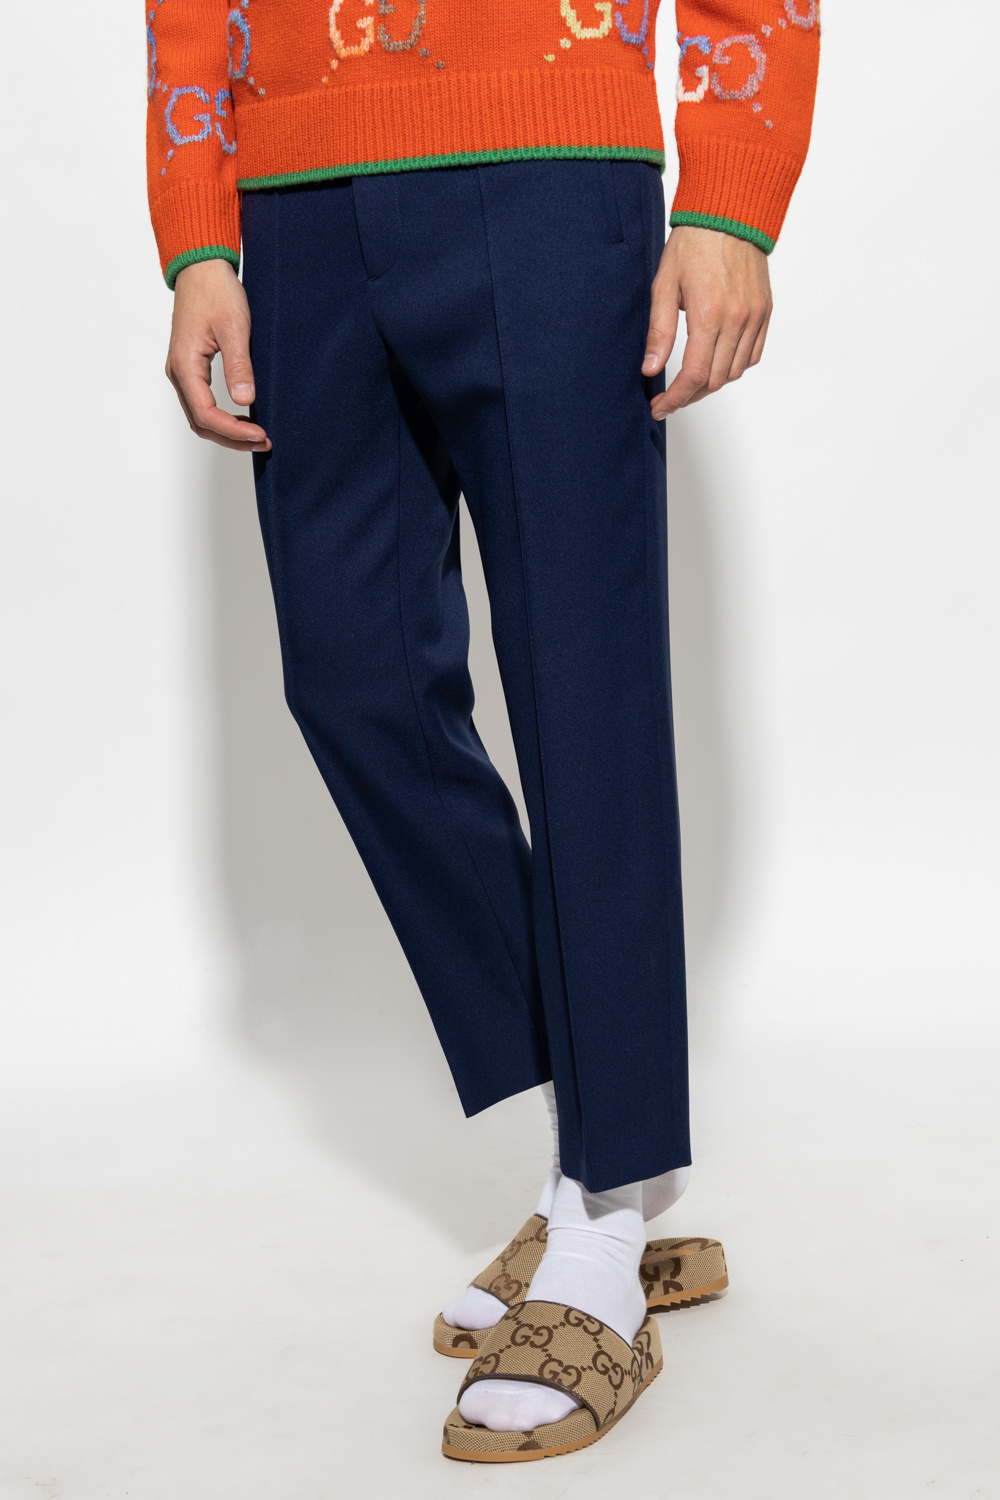 Gucci Sidestripe Trousers in Natural for Men  Lyst